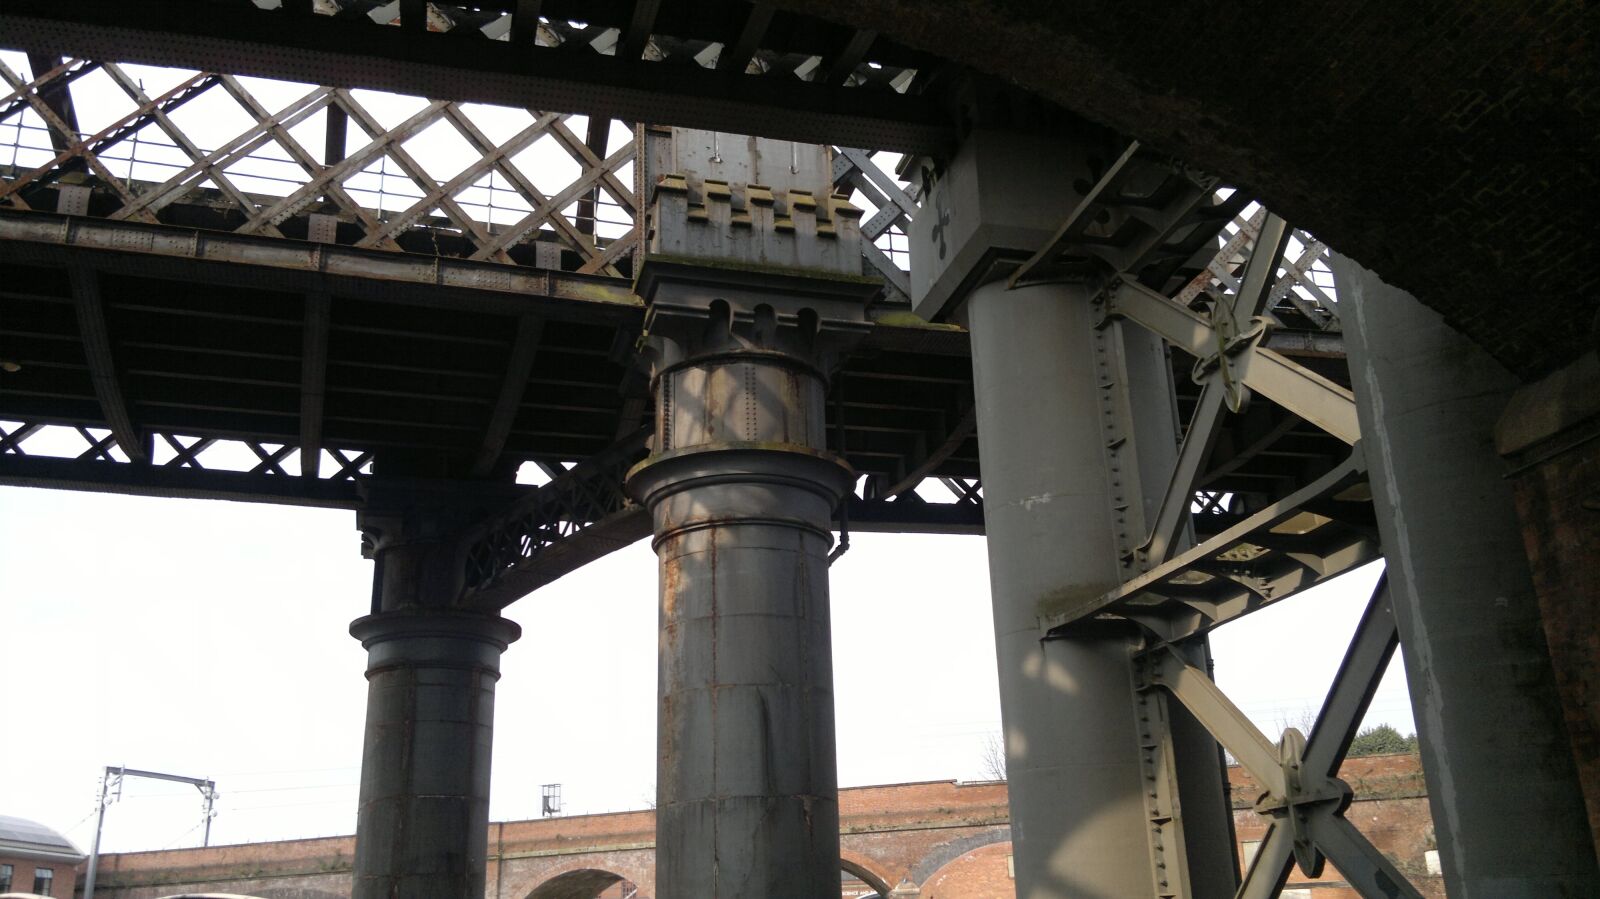 Nokia N8-00 sample photo. Steel, industry, transportation system photography